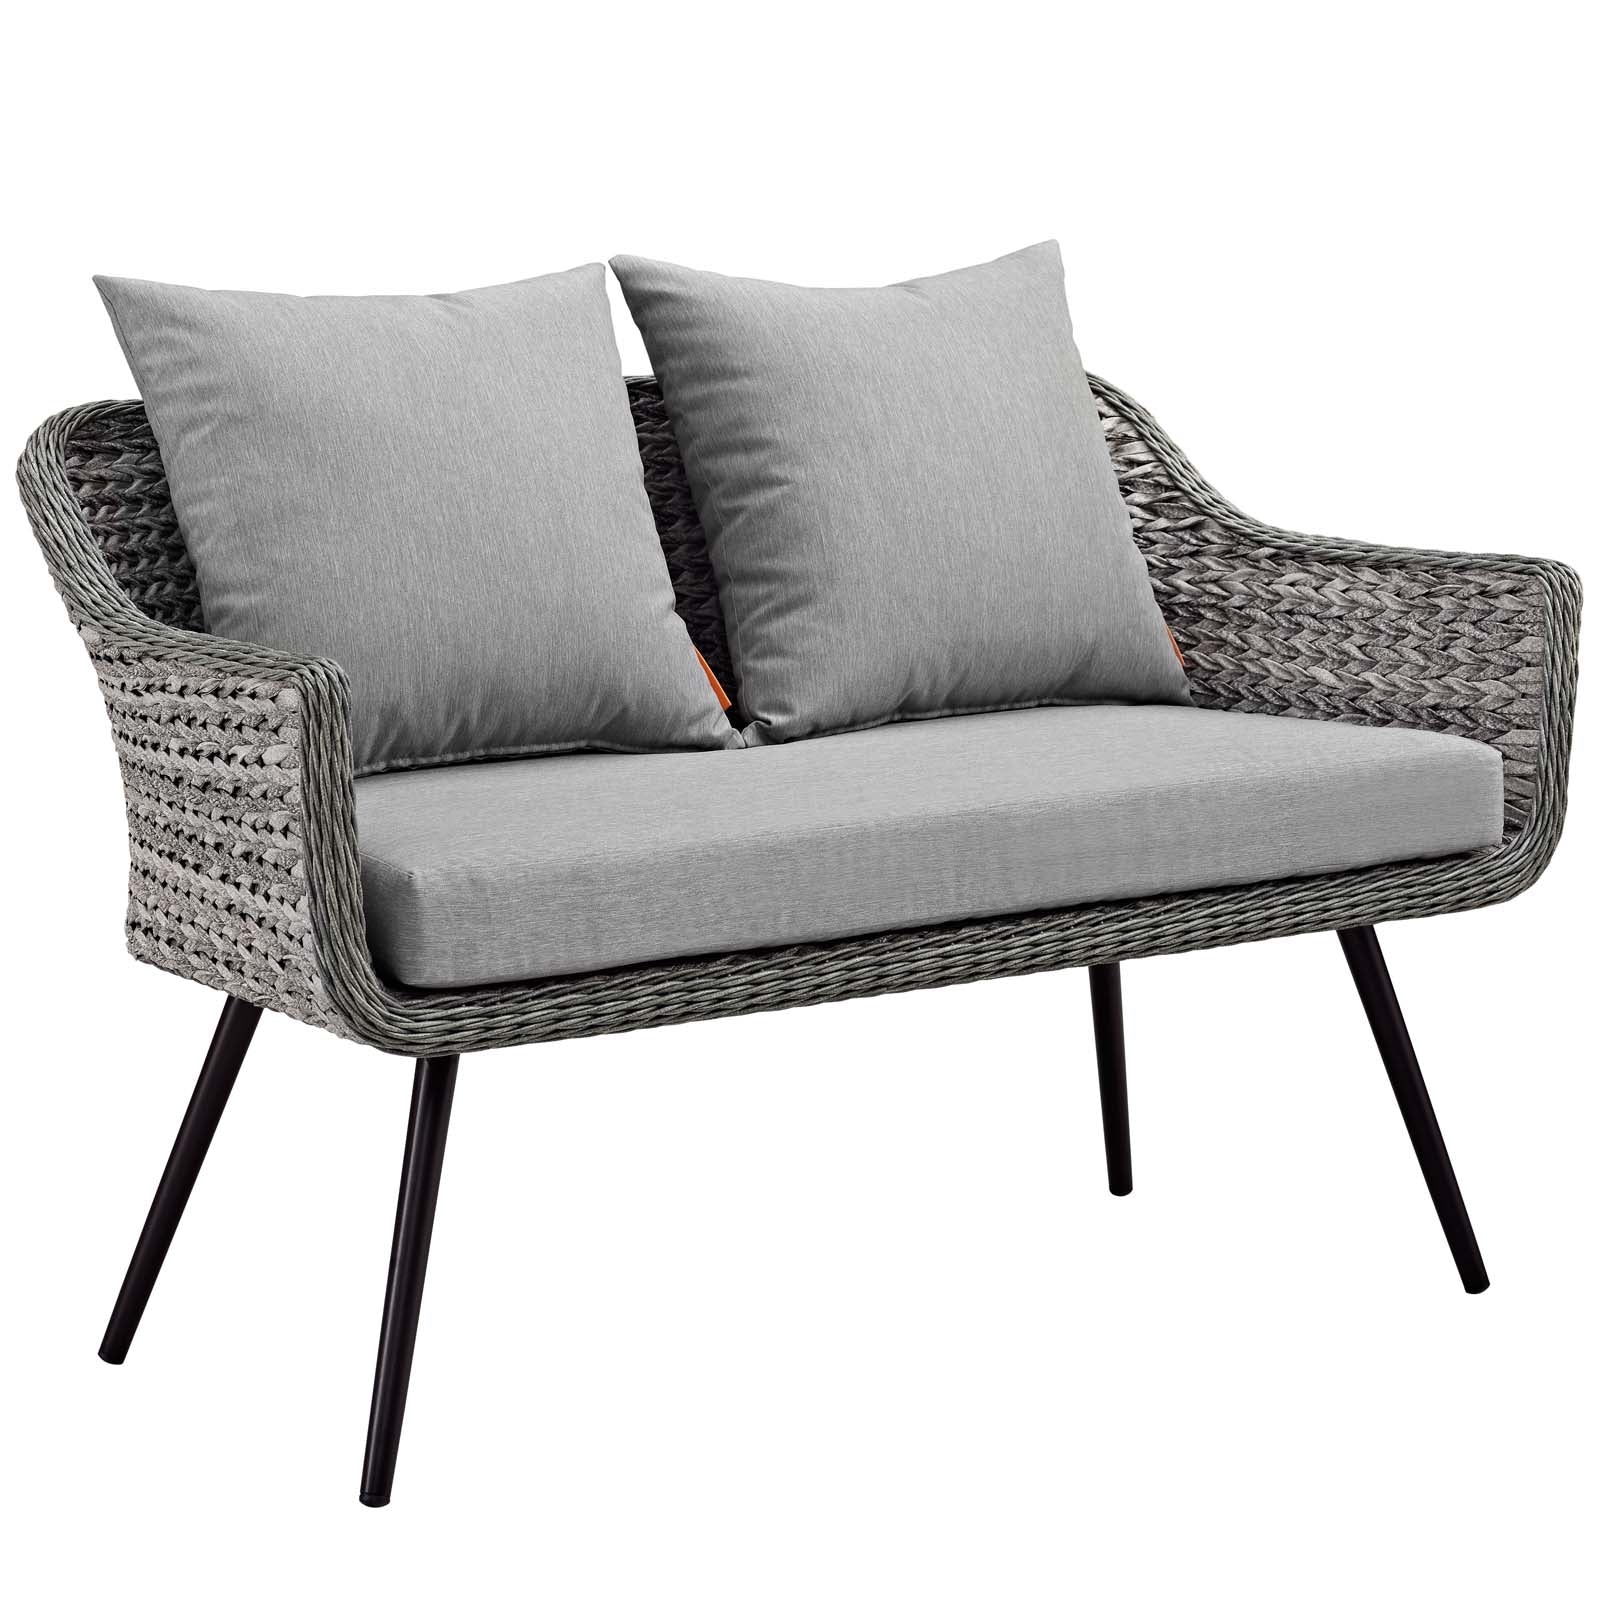 Endeavor 2 Piece Outdoor Patio Wicker Rattan Sectional Sofa Set-Outdoor Set-Modway-Wall2Wall Furnishings